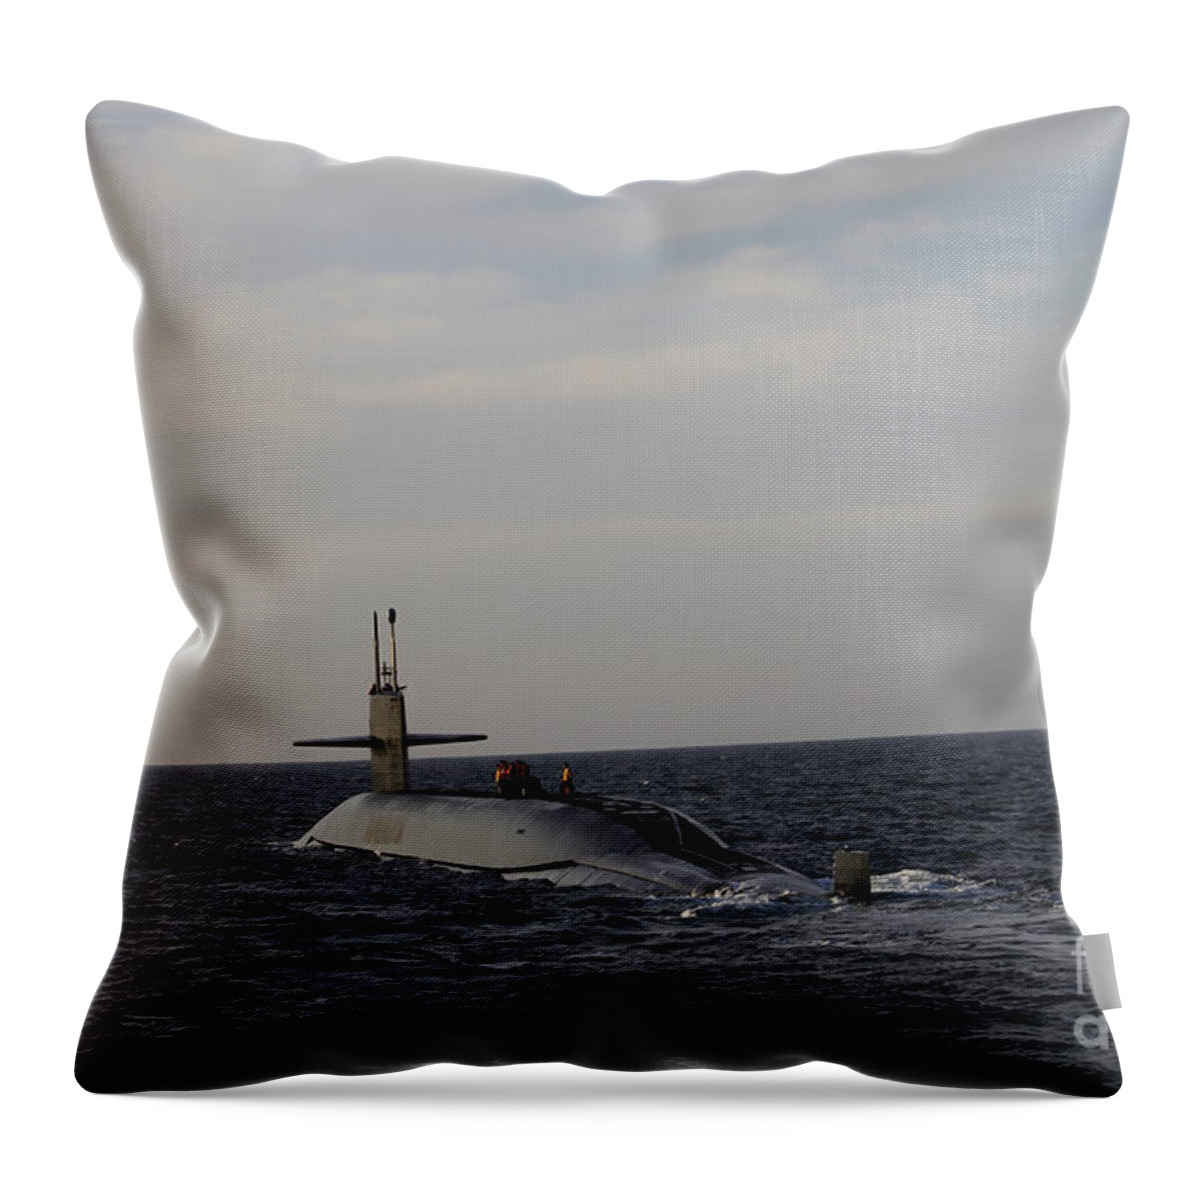 Submarine Throw Pillow featuring the photograph The Ballistic Missile Submarine Uss #1 by Stocktrek Images